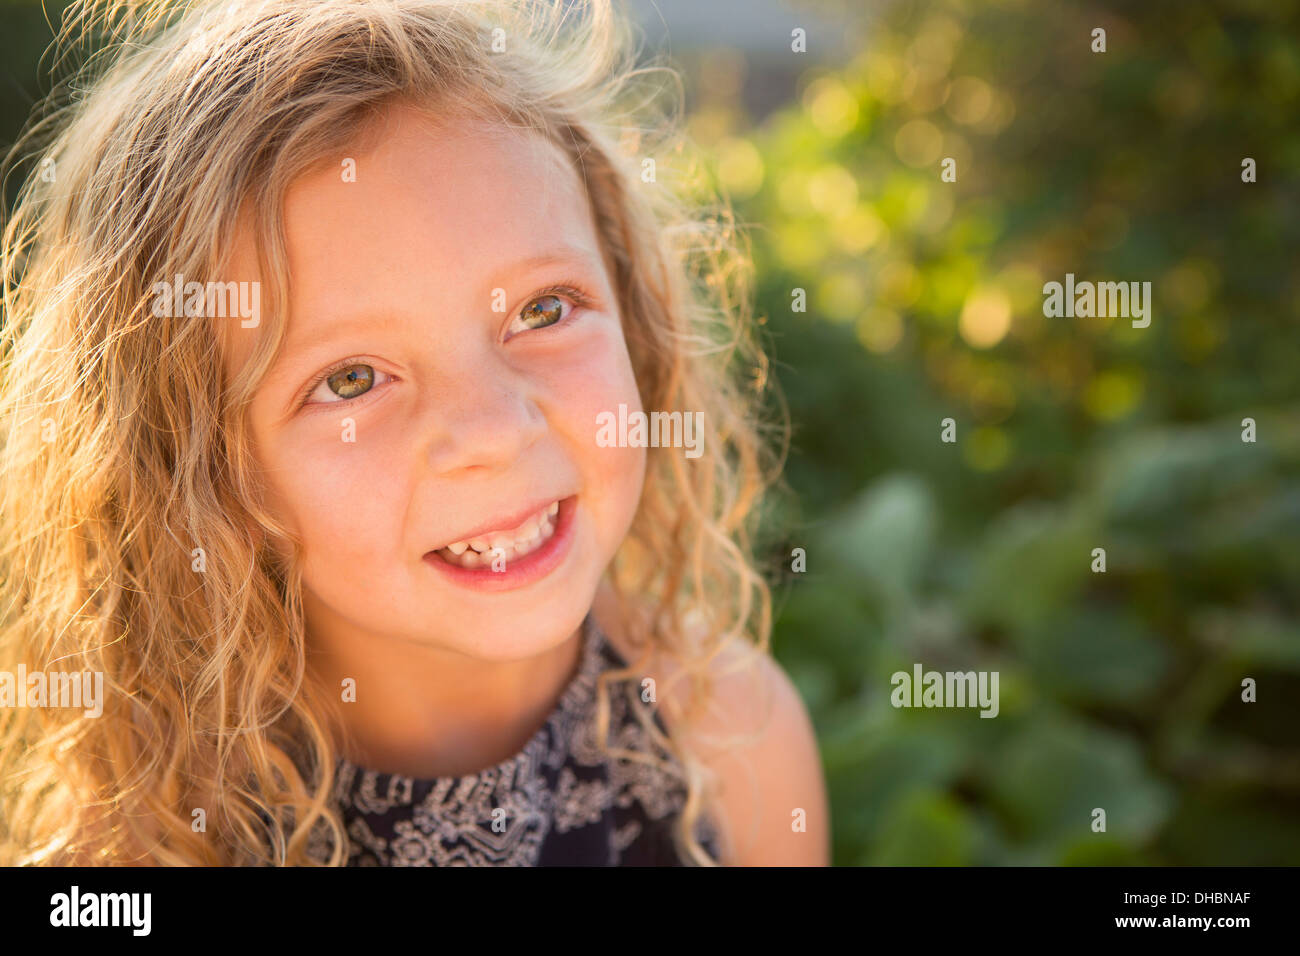 A young girl with long red curly hair outdoors in a garden. Stock Photo